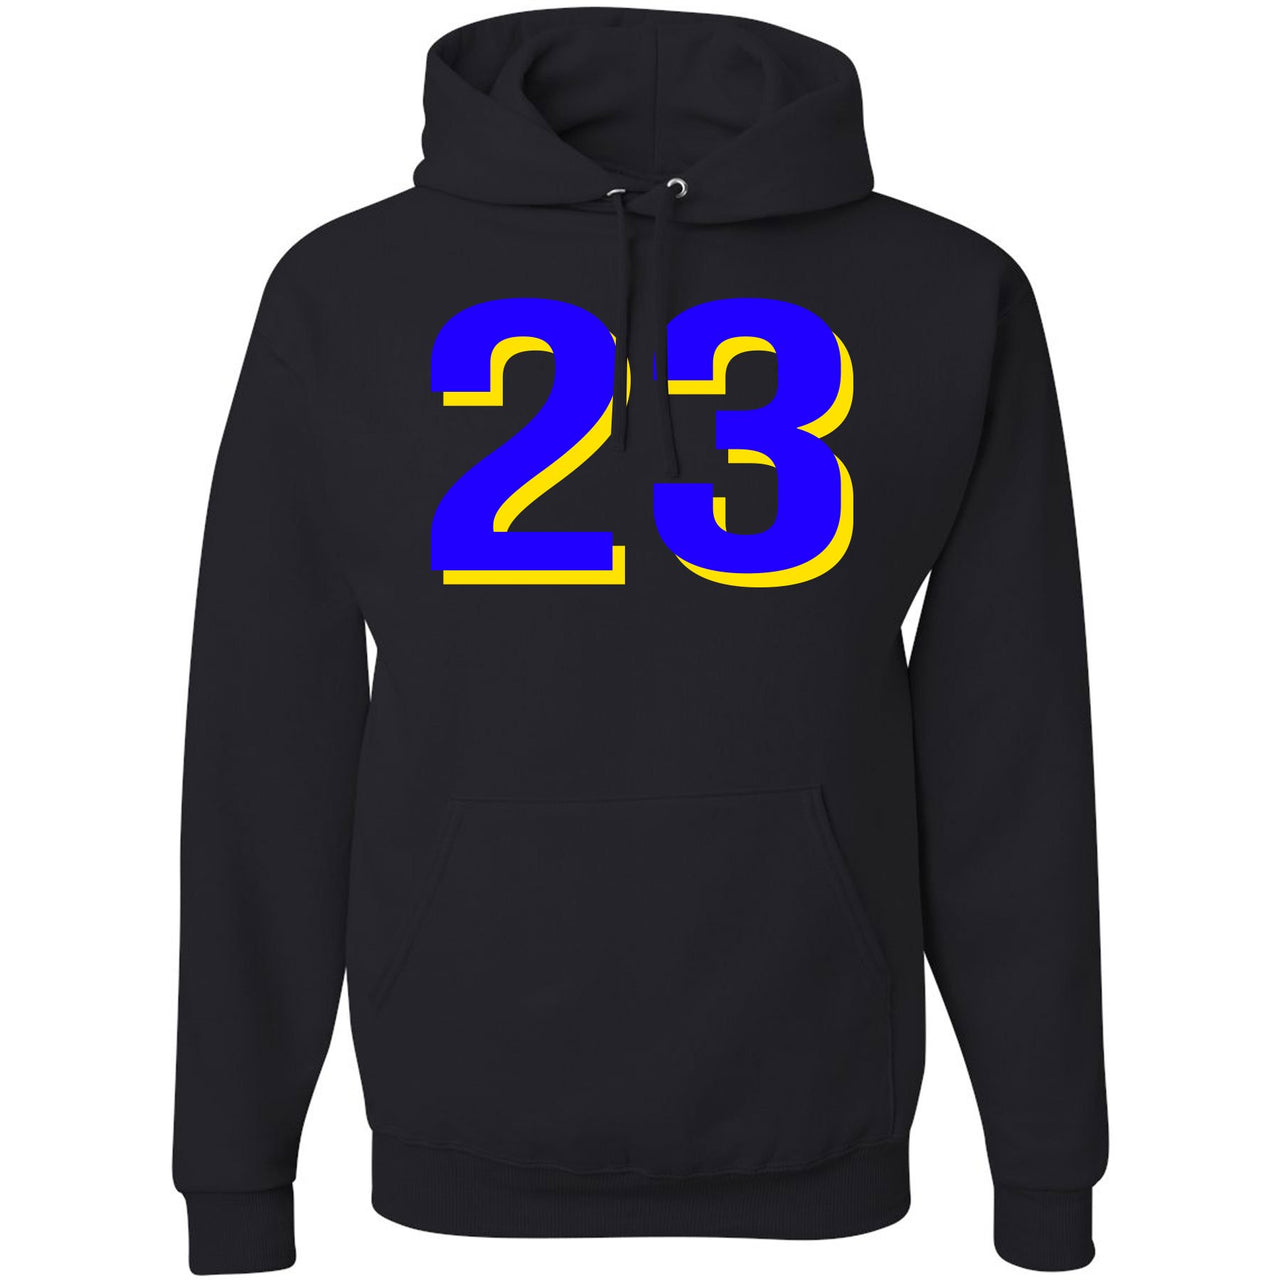 Printed on the front of the Air Jordan 5 Laney Alternate JSP sneaker matching hoodie is the 23 logo in blue and yellow